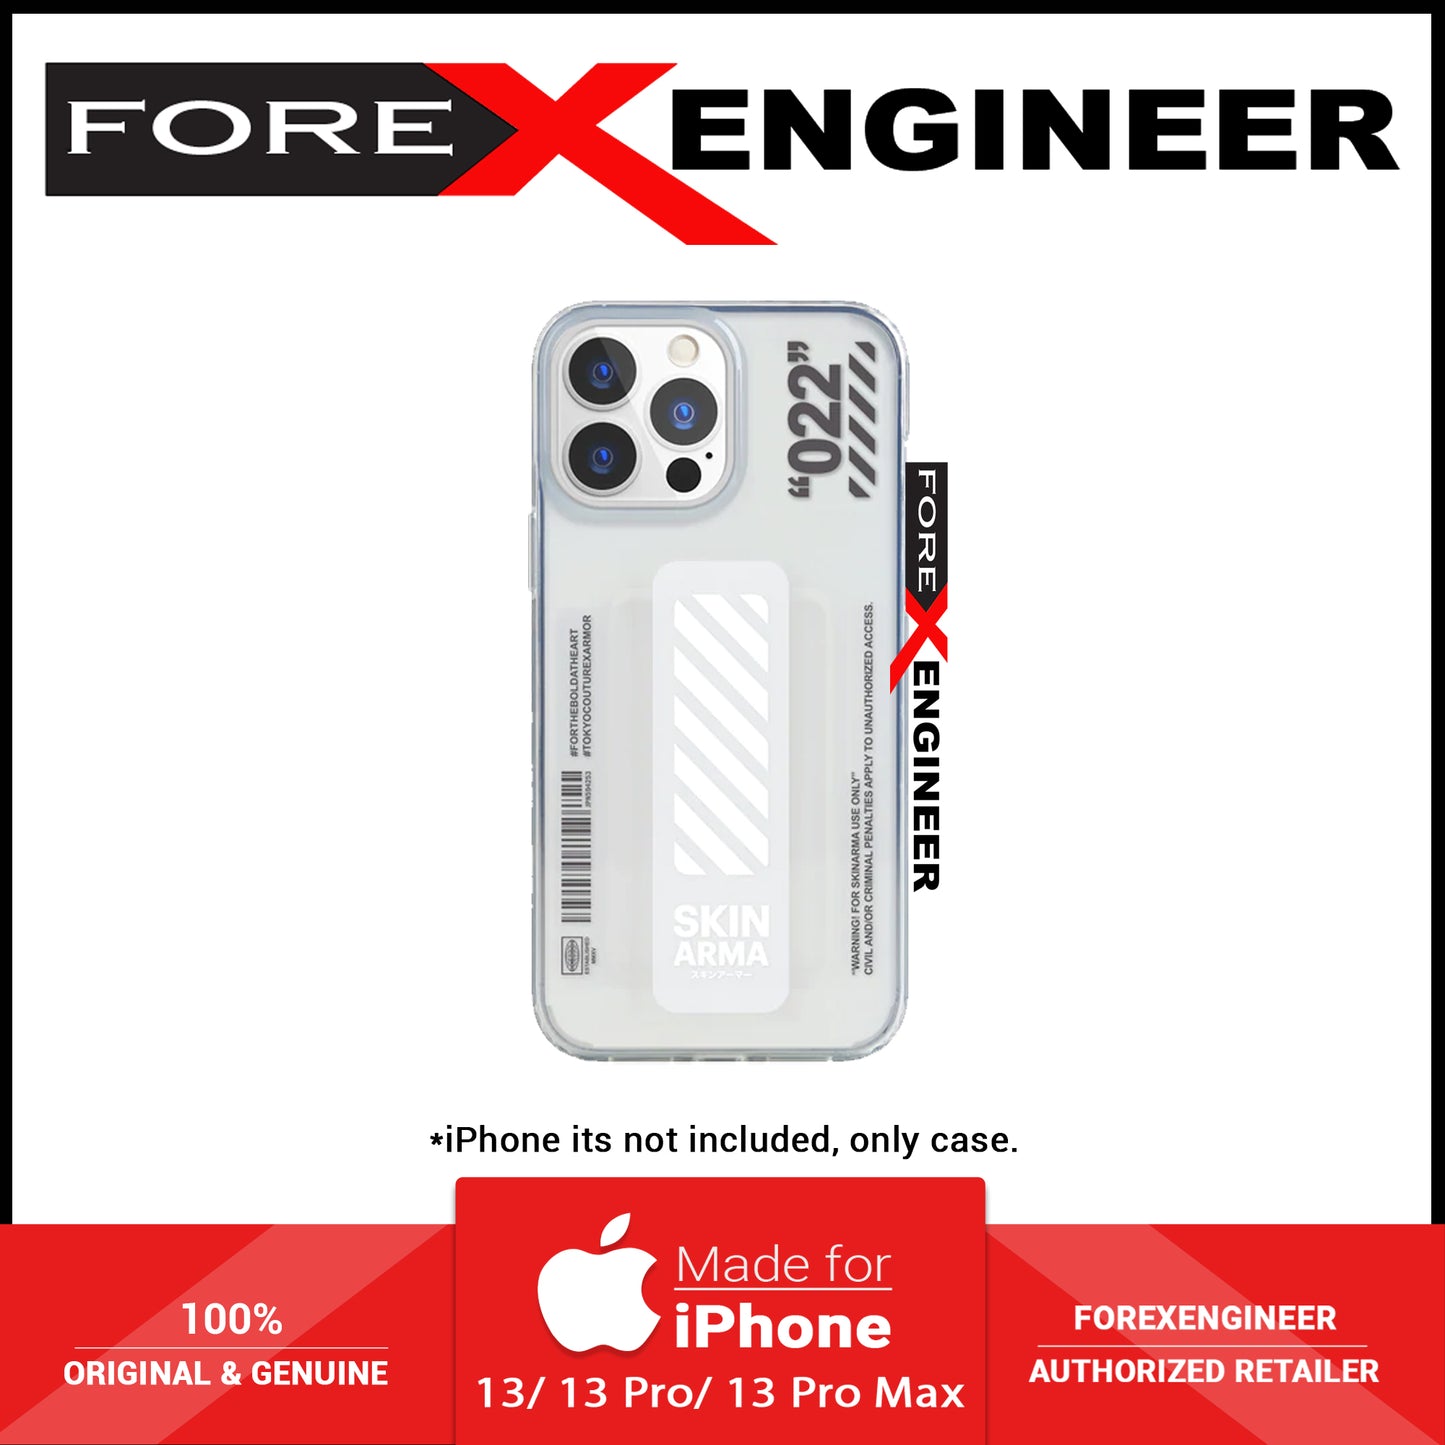 SKINARMA Kaze Case for iPhone 13 Pro 6.1" 5G - Clear (Barcode: 6972926575044 )